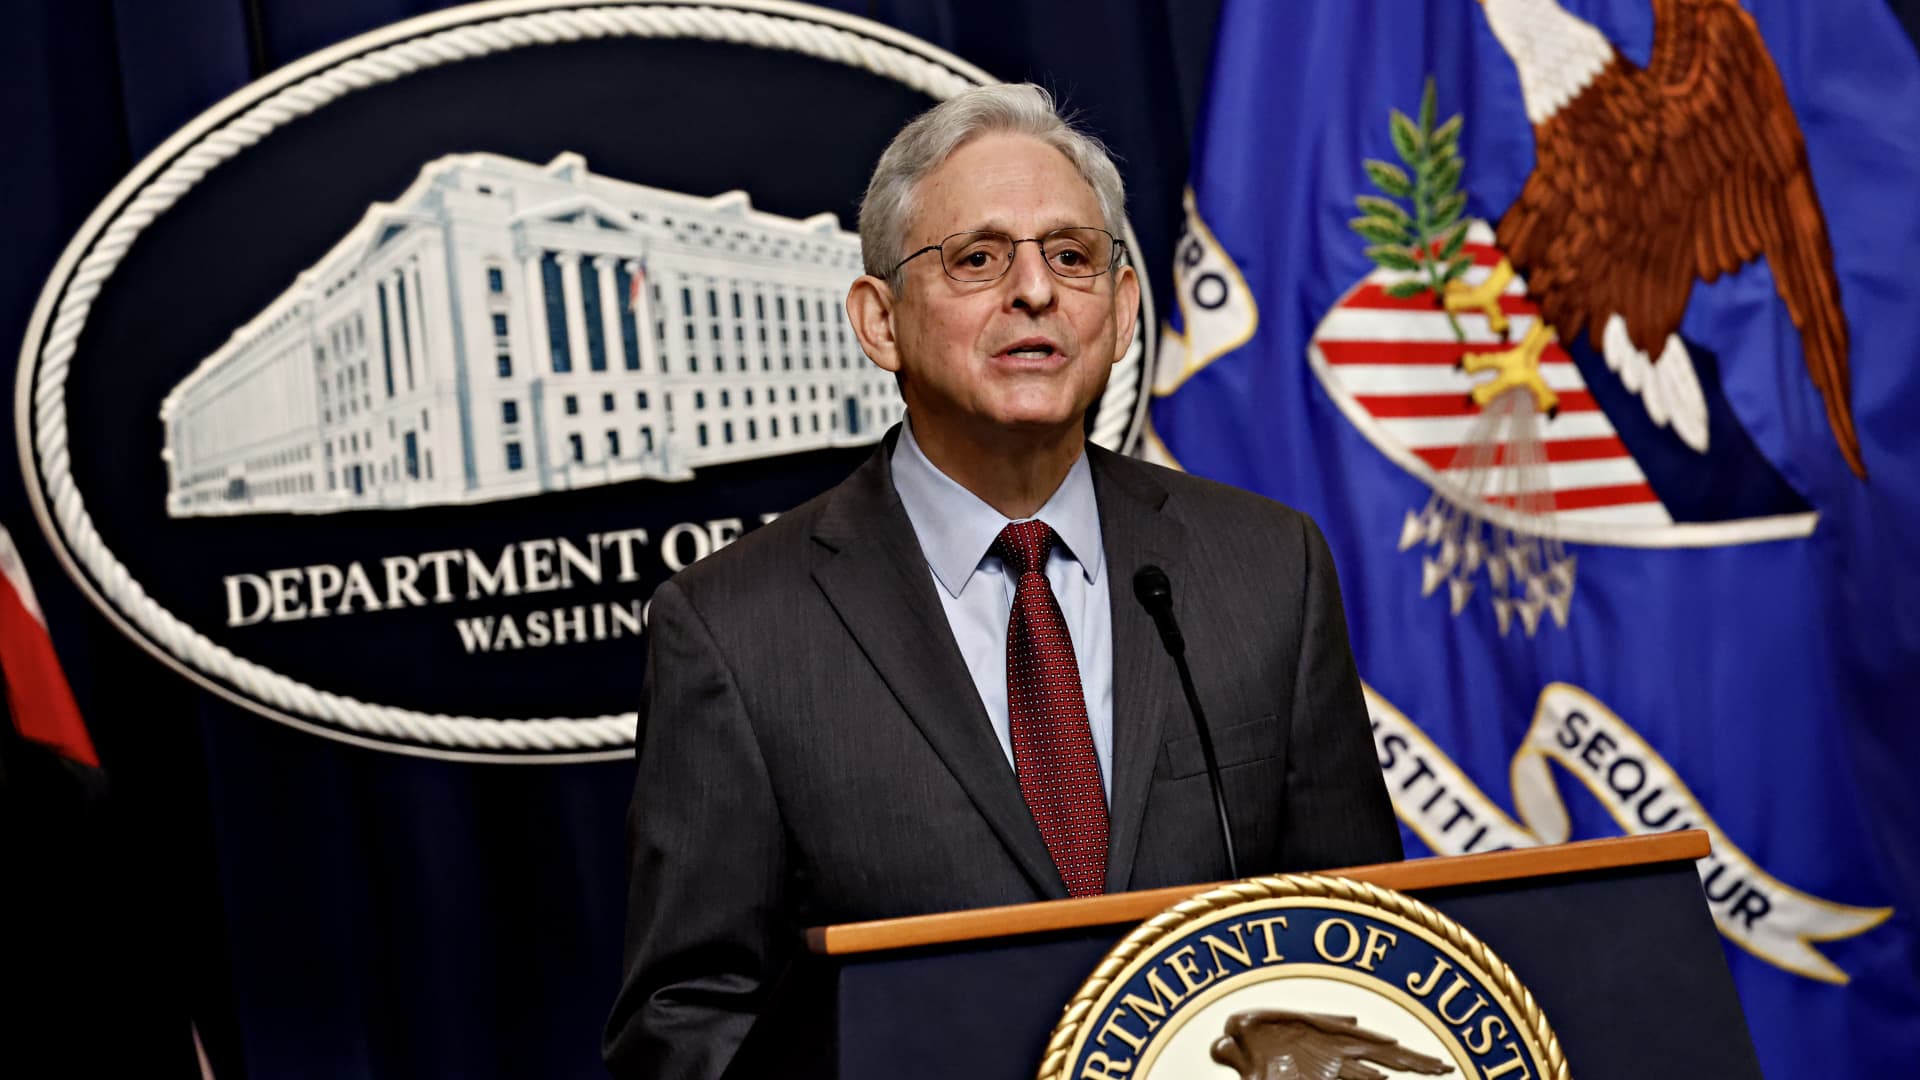 Merrick Garland, US attorney general, speaks during a news conference at the Department of Justice in Washington, DC, US, on Tuesday, March 7, 2023. The US Justice Department challenged JetBlue Airways Corp.'s $3.8 billion acquisition of Spirit Airlines Inc., filing an antitrust lawsuit seeking to block the deal. 